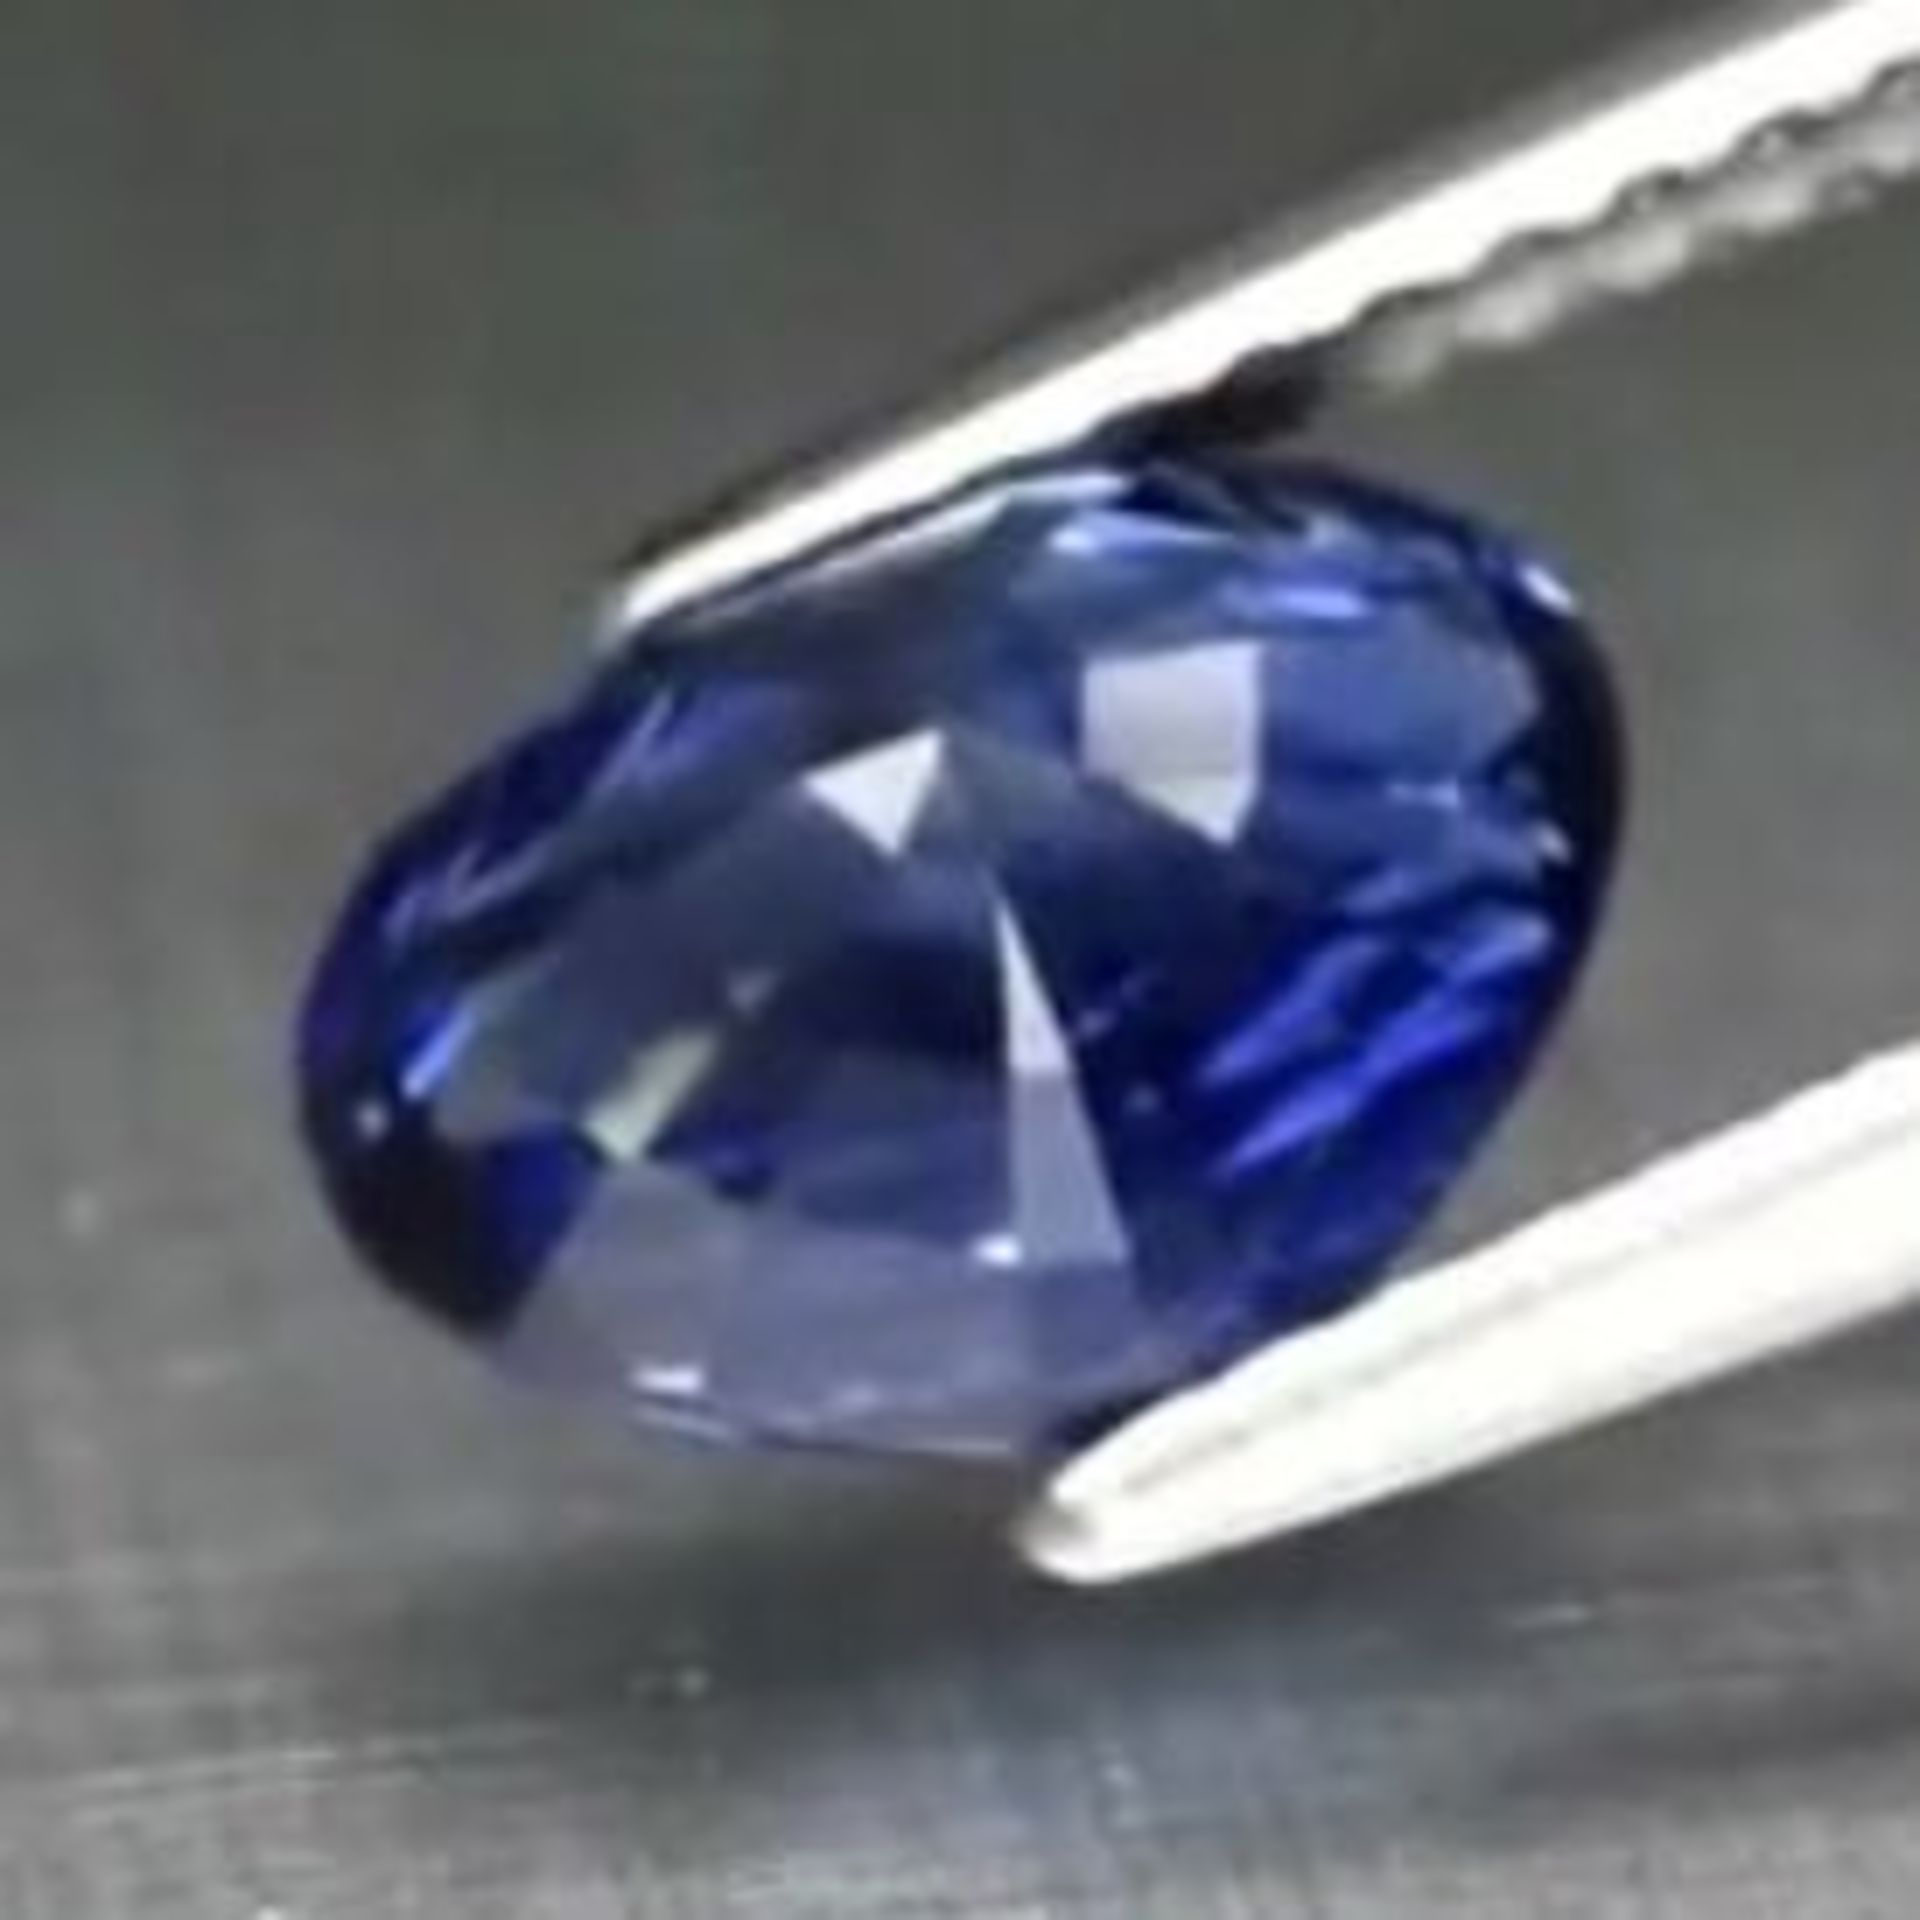 GIA Certified 2.08 ct. Blue Sapphire - Image 10 of 10